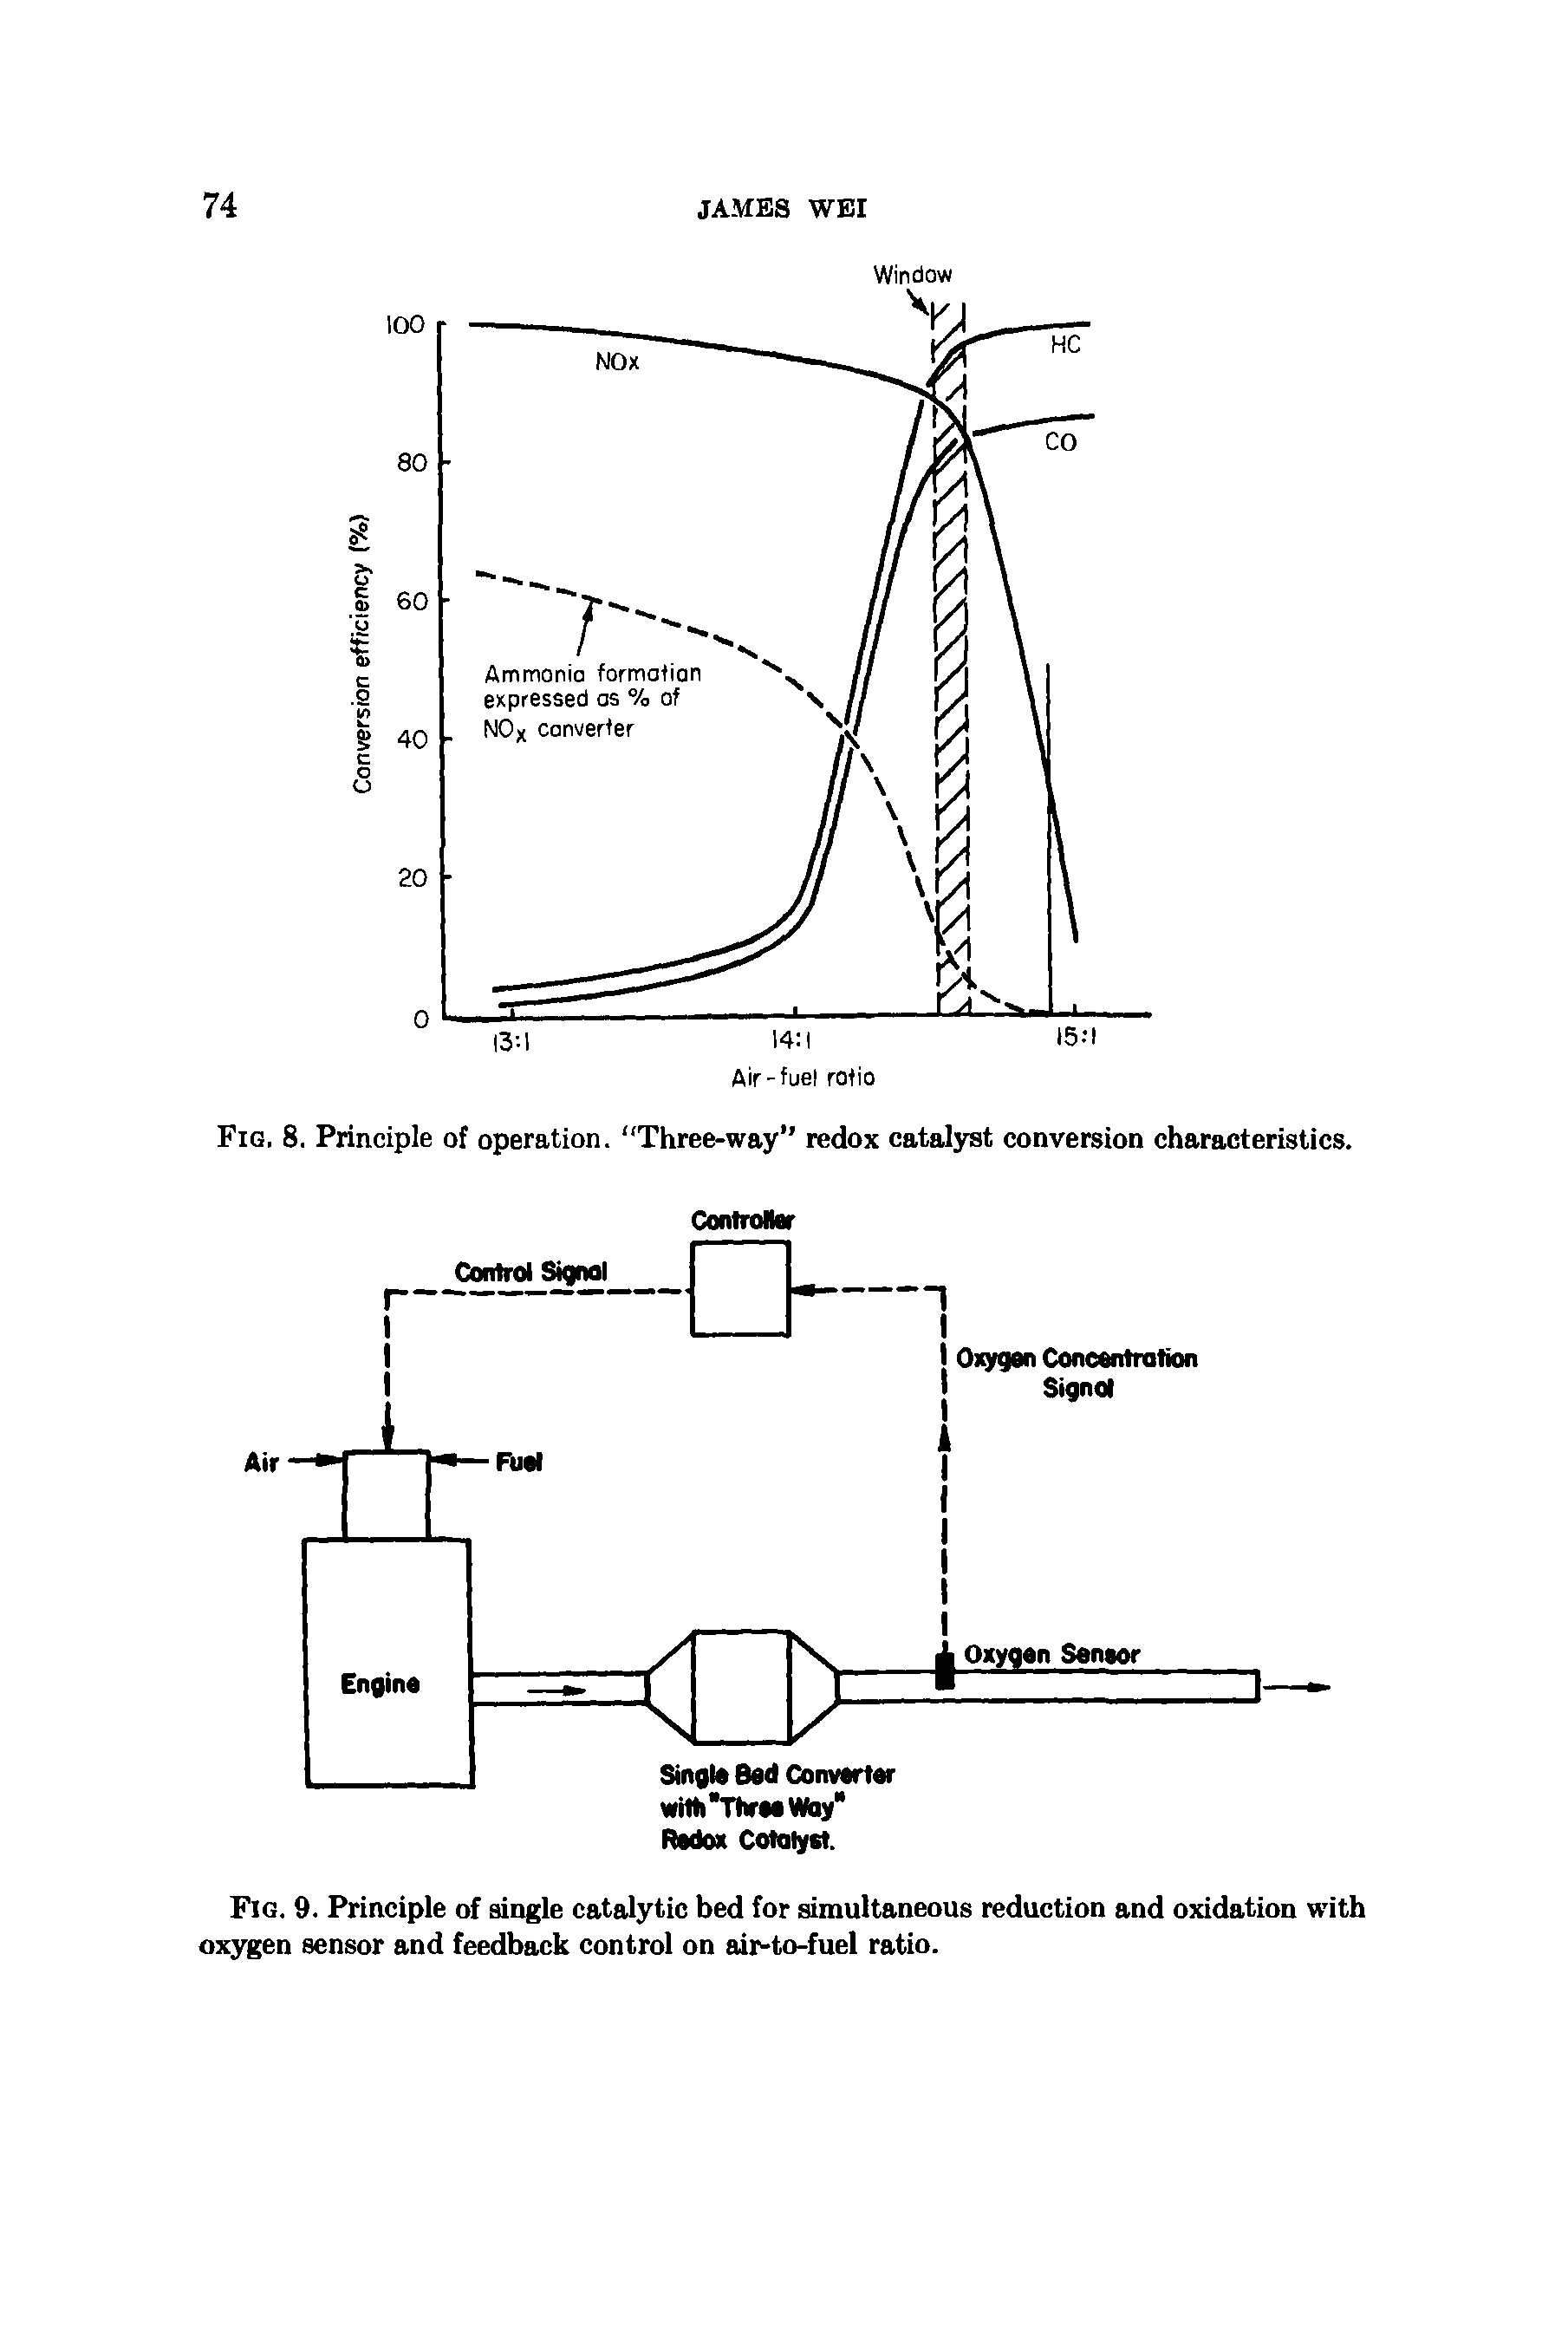 Fig. 9. Principle of single catalytic bed for simultaneous reduction and oxidation with oxygen sensor and feedback control on air-to-fuel ratio.